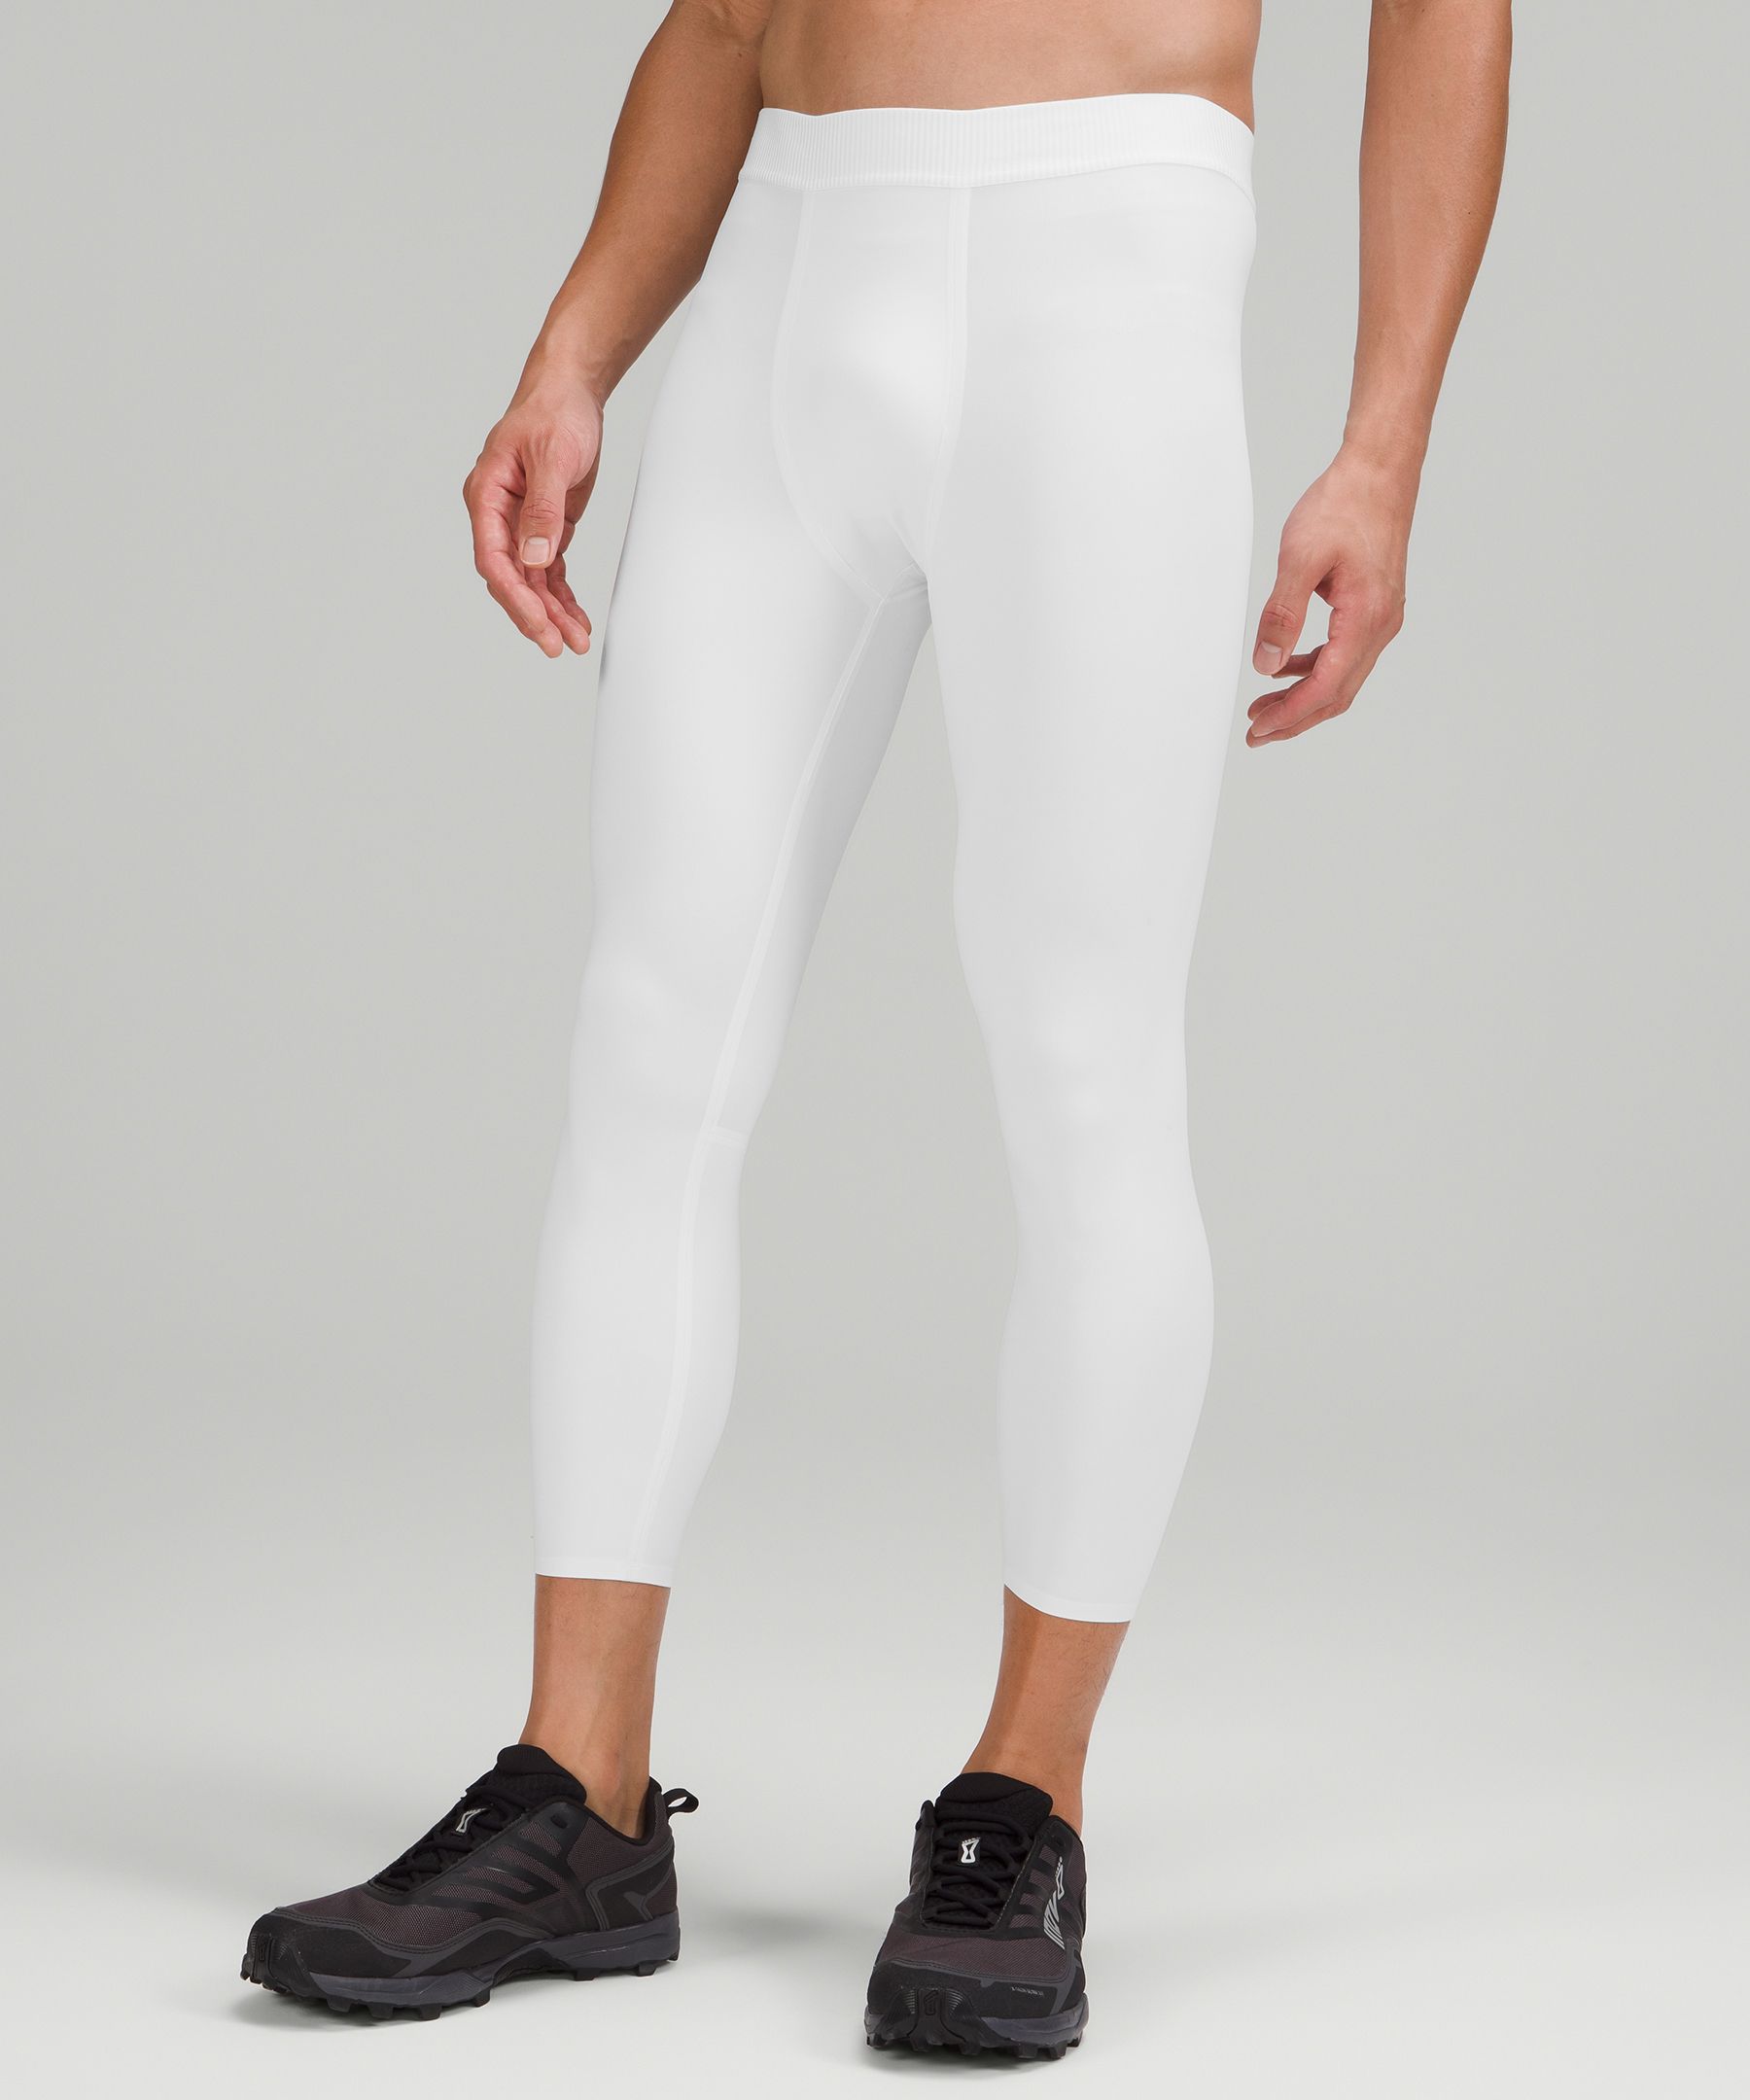 Lululemon License To Train Tights 21" In White